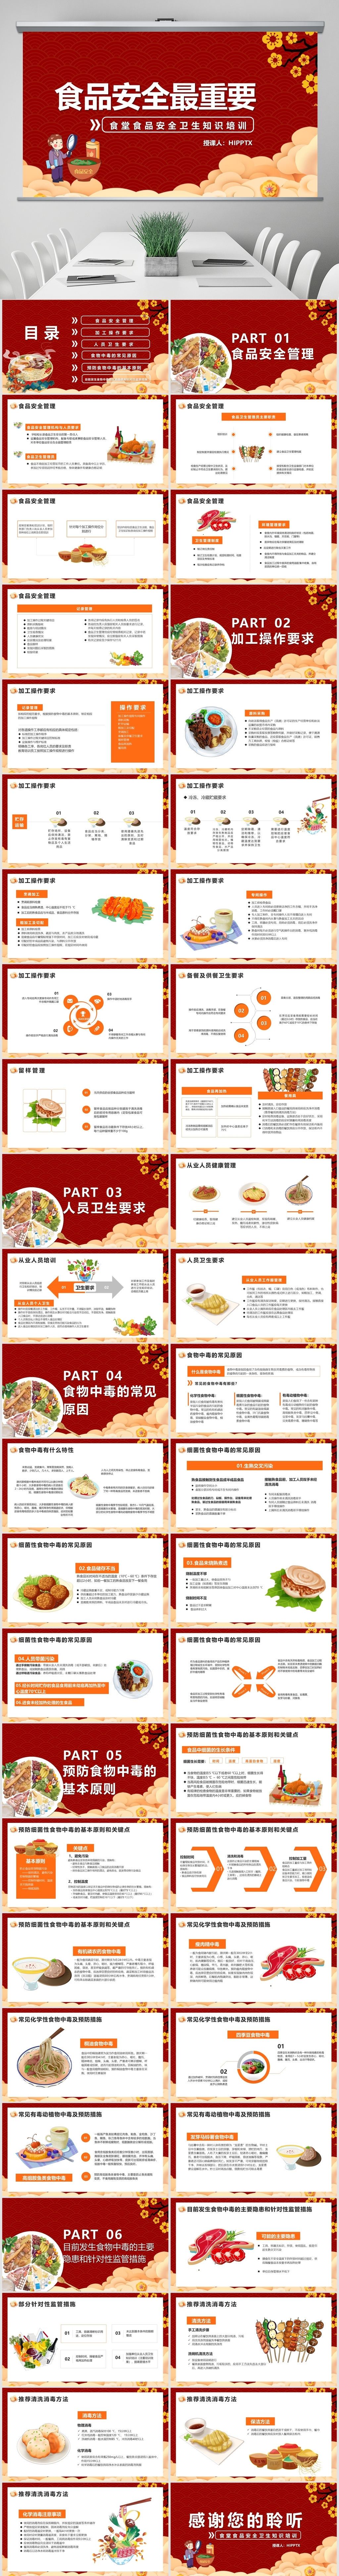 Canteen food safety and hygiene knowledge training ppt courseware